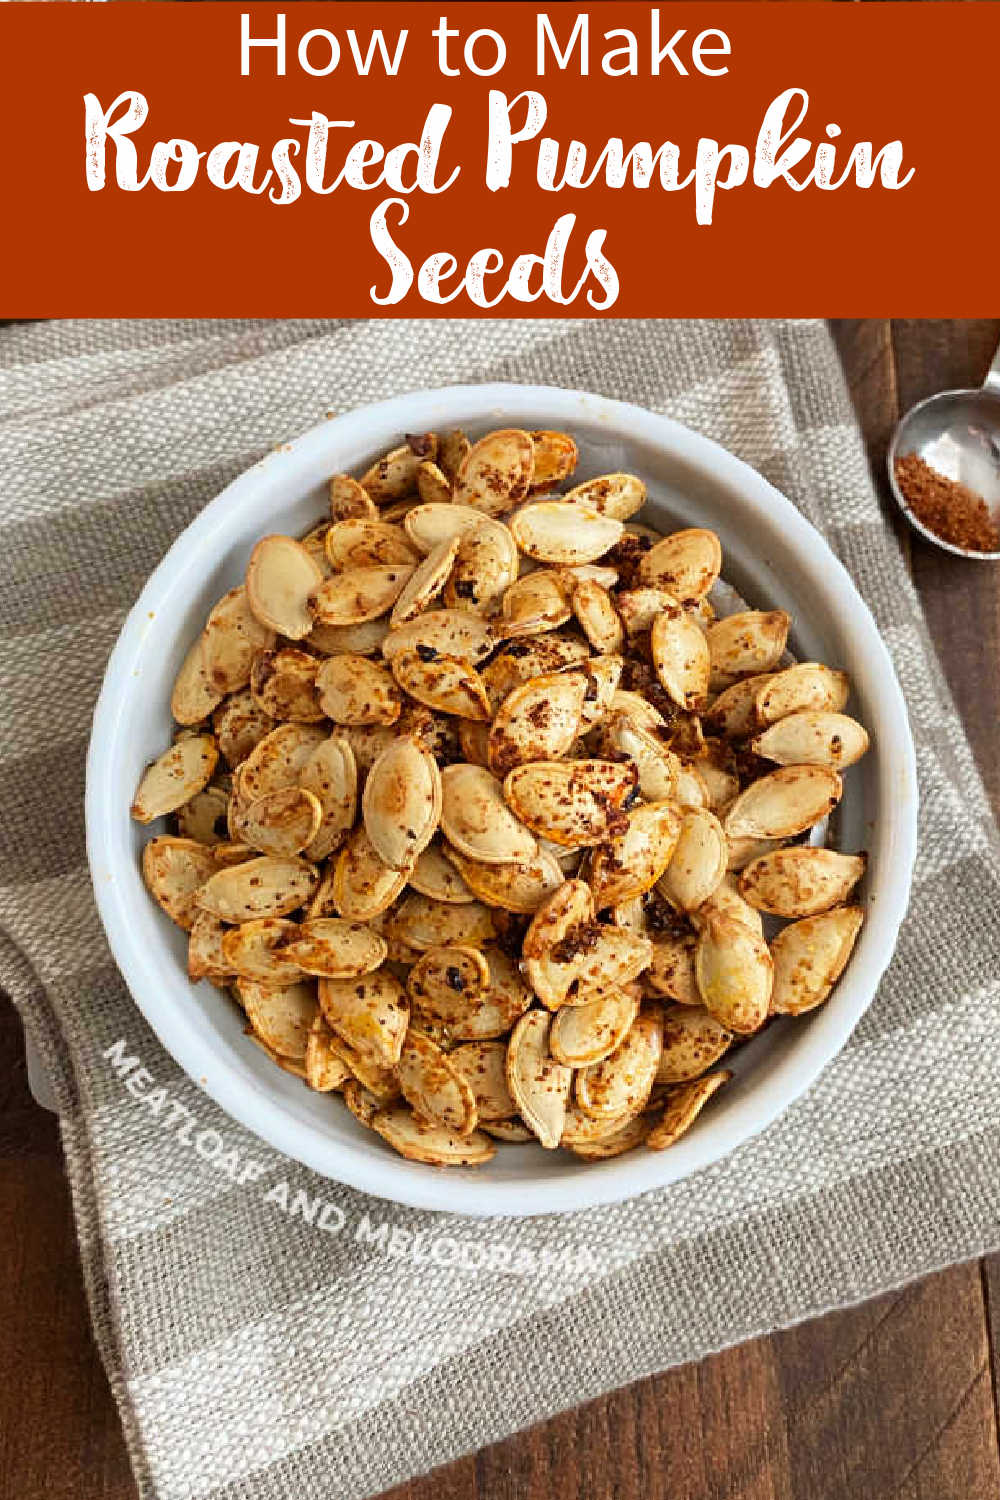 Learn how to make Roasted Pumpkin Seeds with this foolproof method. This easy pumpkin seeds recipe makes a delicious, crunchy, healthy snack that is perfect for fall! via @meamel